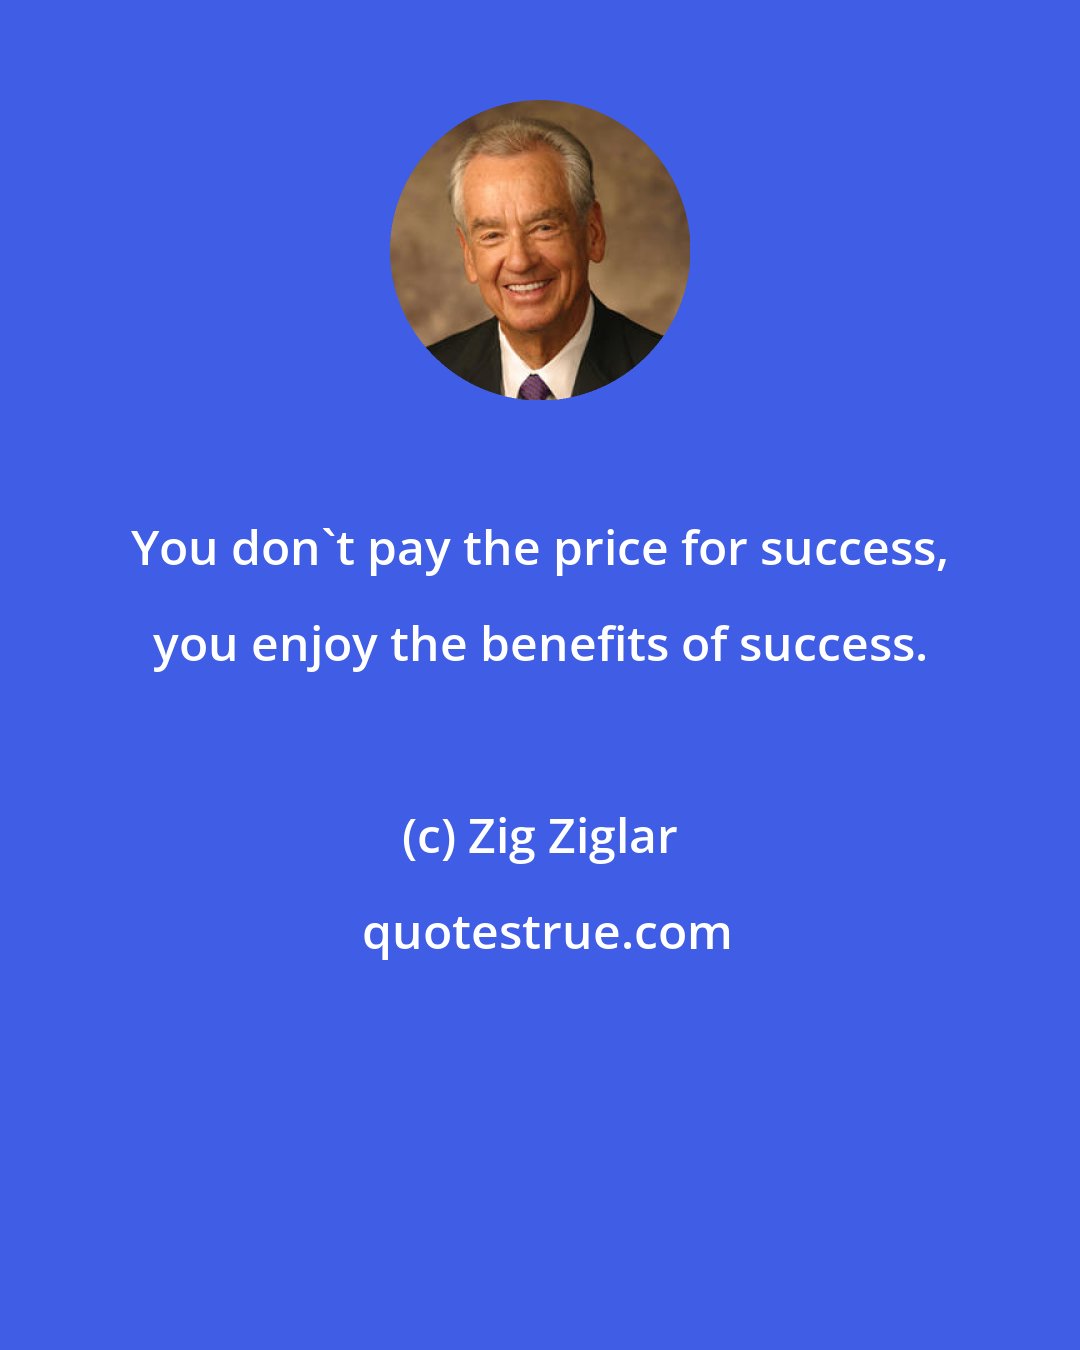 Zig Ziglar: You don't pay the price for success, you enjoy the benefits of success.